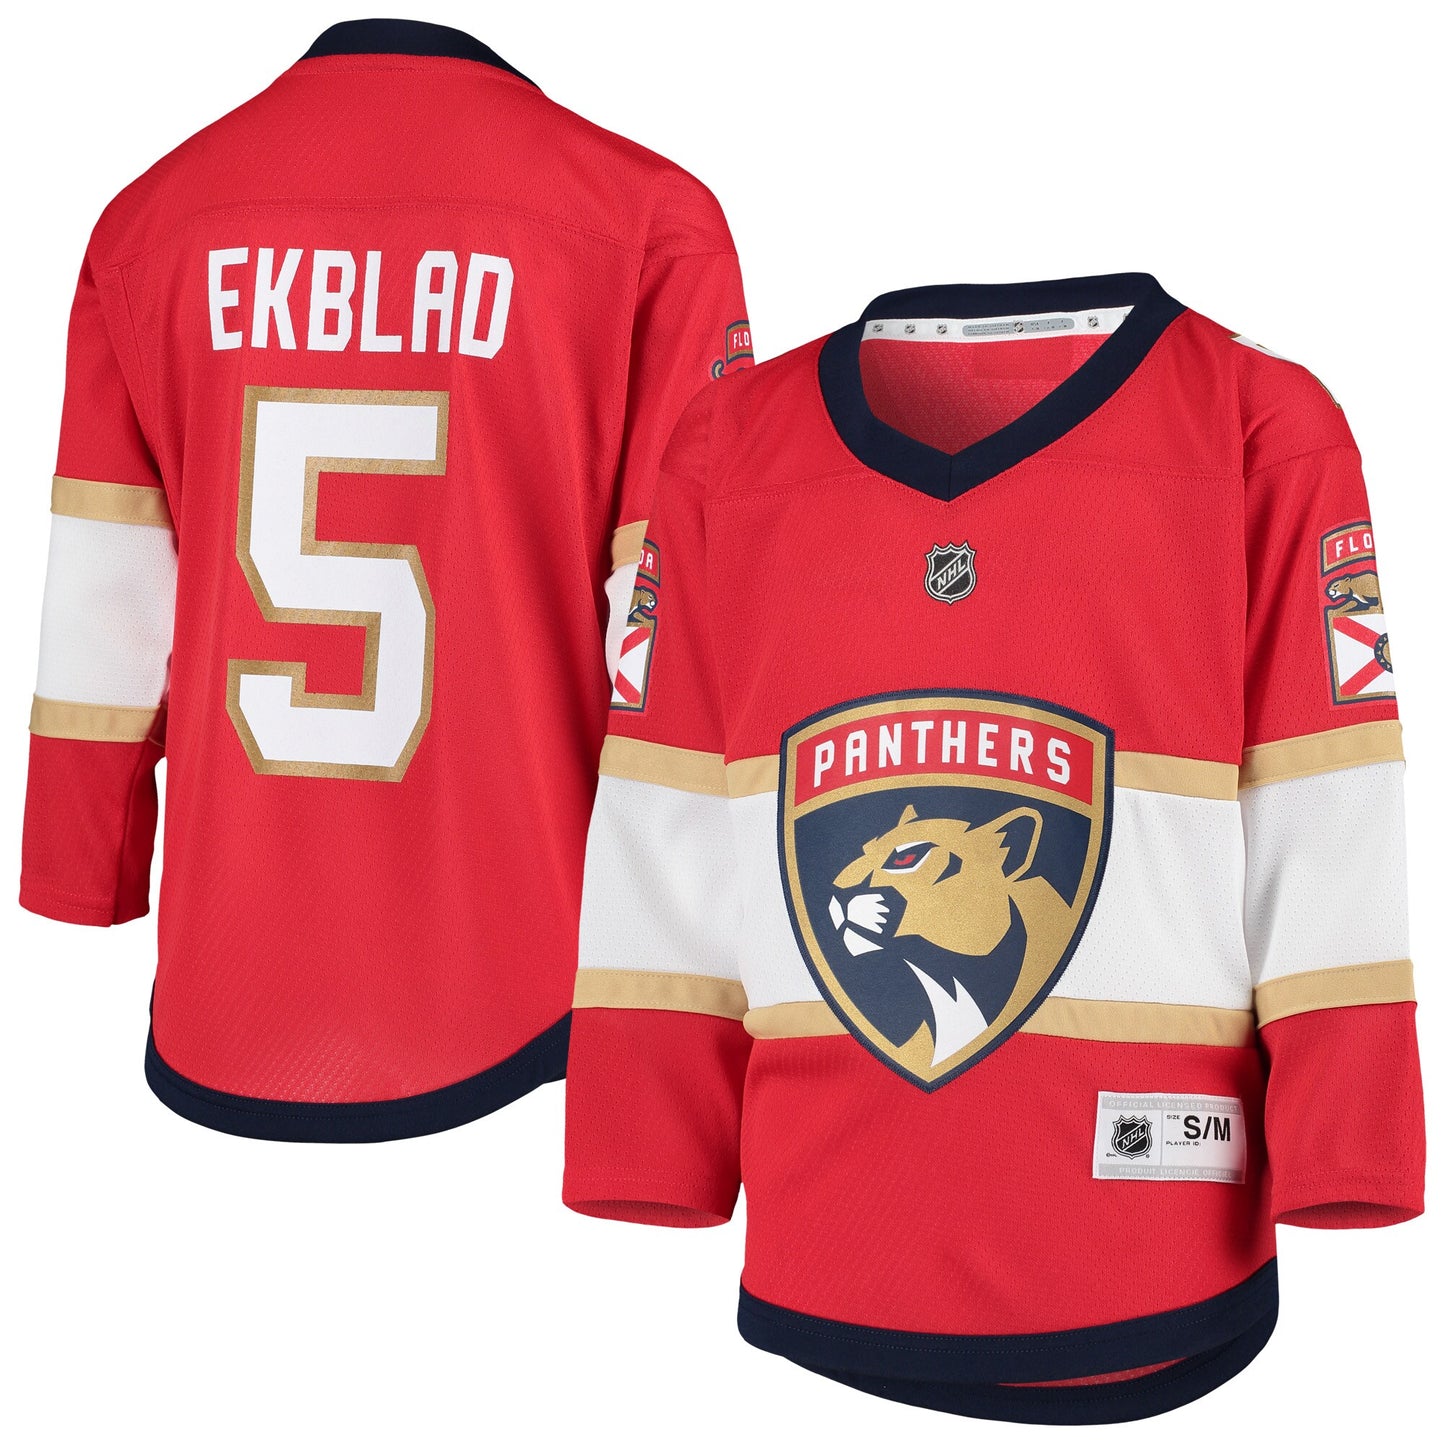 Aaron Ekblad Florida Panthers Youth Home Replica Player Jersey &#8211; Red